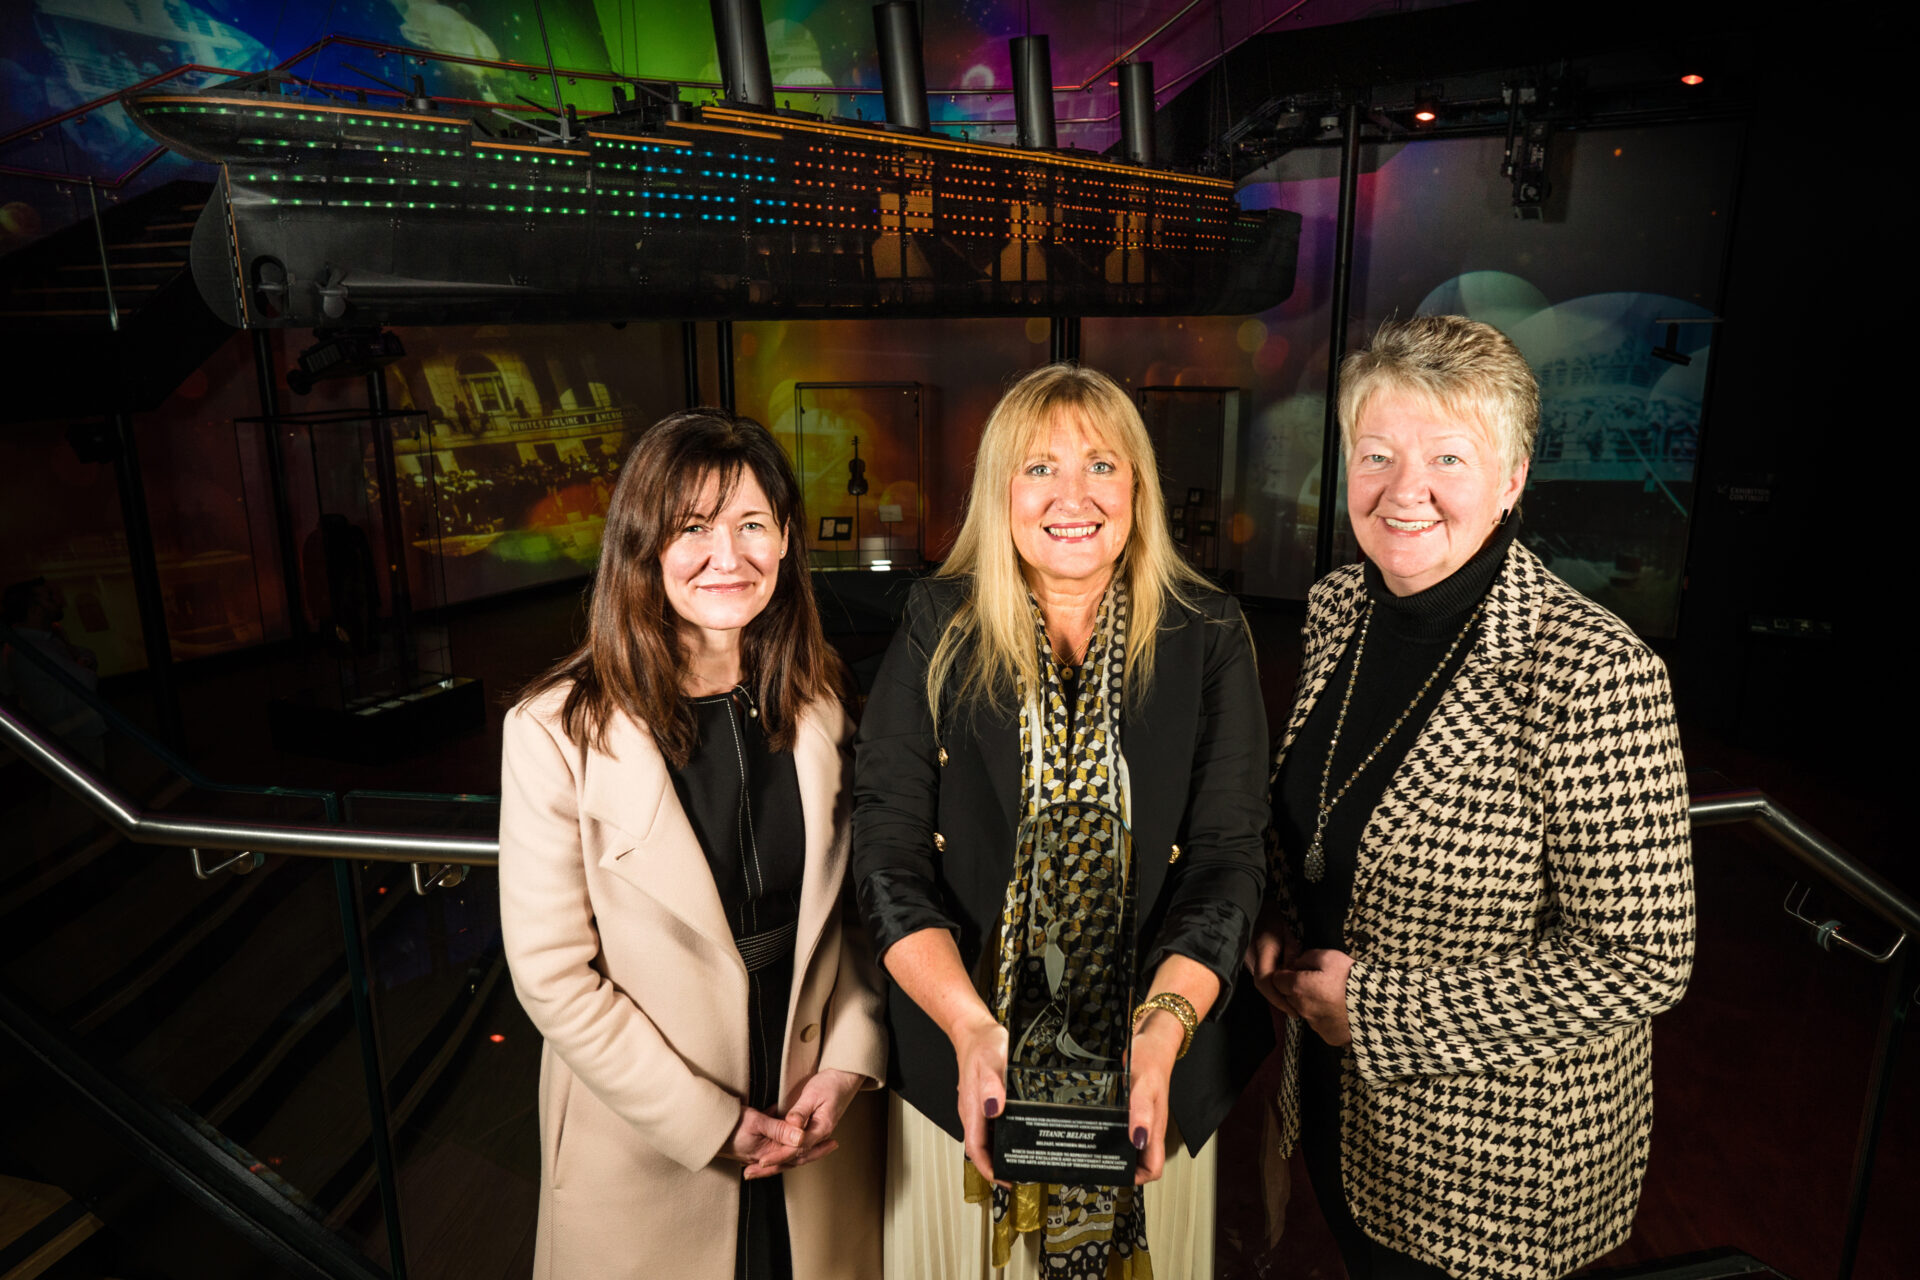 INTERNATIONAL AWARD FOR TITANIC BELFAST… Pictured at the announcement that Titanic Belfast has won the THEA Award for Outstanding Achievement – Visitor Experience Re-envisioned: Limited Budget are Kerrie Sweeney, Chief Executive of Maritime Belfast Trust, Judith Owens MBE, Chief Executive of Titanic Belfast and Ellvena Graham OBE, Chair of Tourism Northern Ireland.